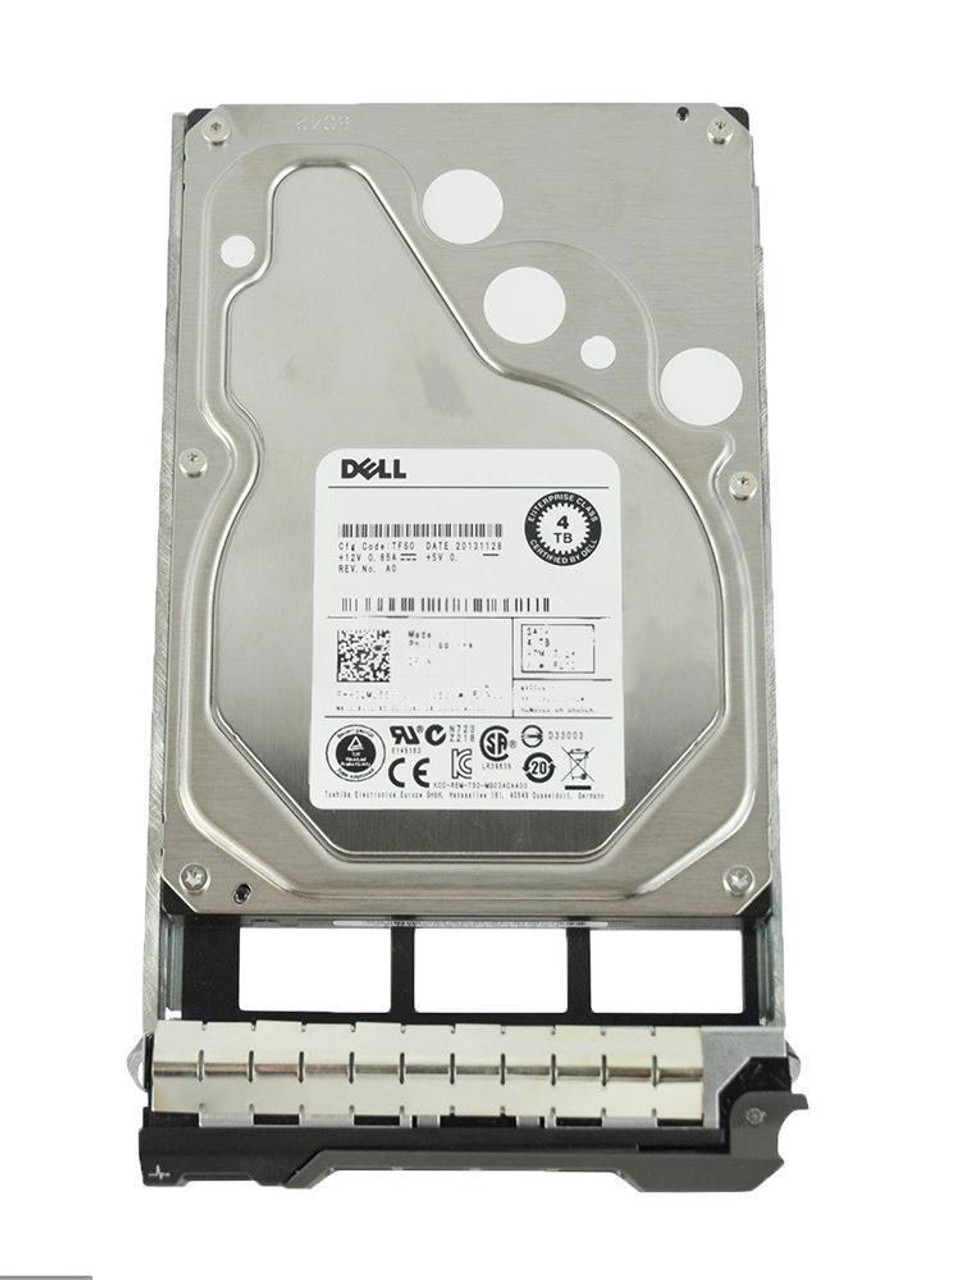 Dell 4TB 7200RPM SAS 12Gbps 3.5-inch Internal Hard Drive with Drive